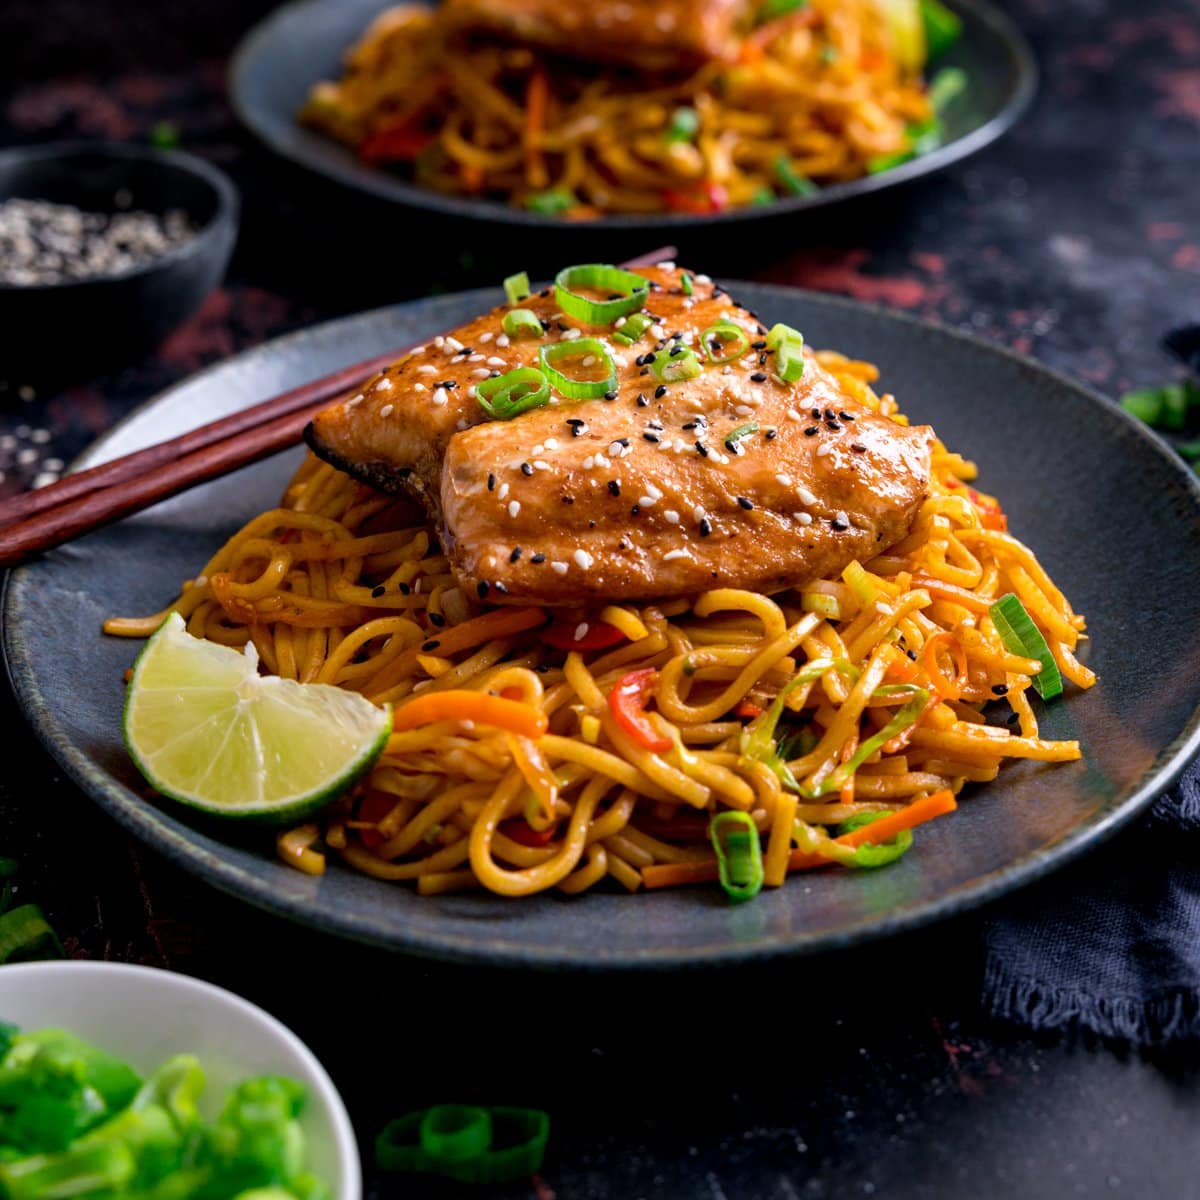 https://www.kitchensanctuary.com/wp-content/uploads/2014/09/Asian-Salmon-with-Chilli-Lime-Noodles-square-FS-34.jpg